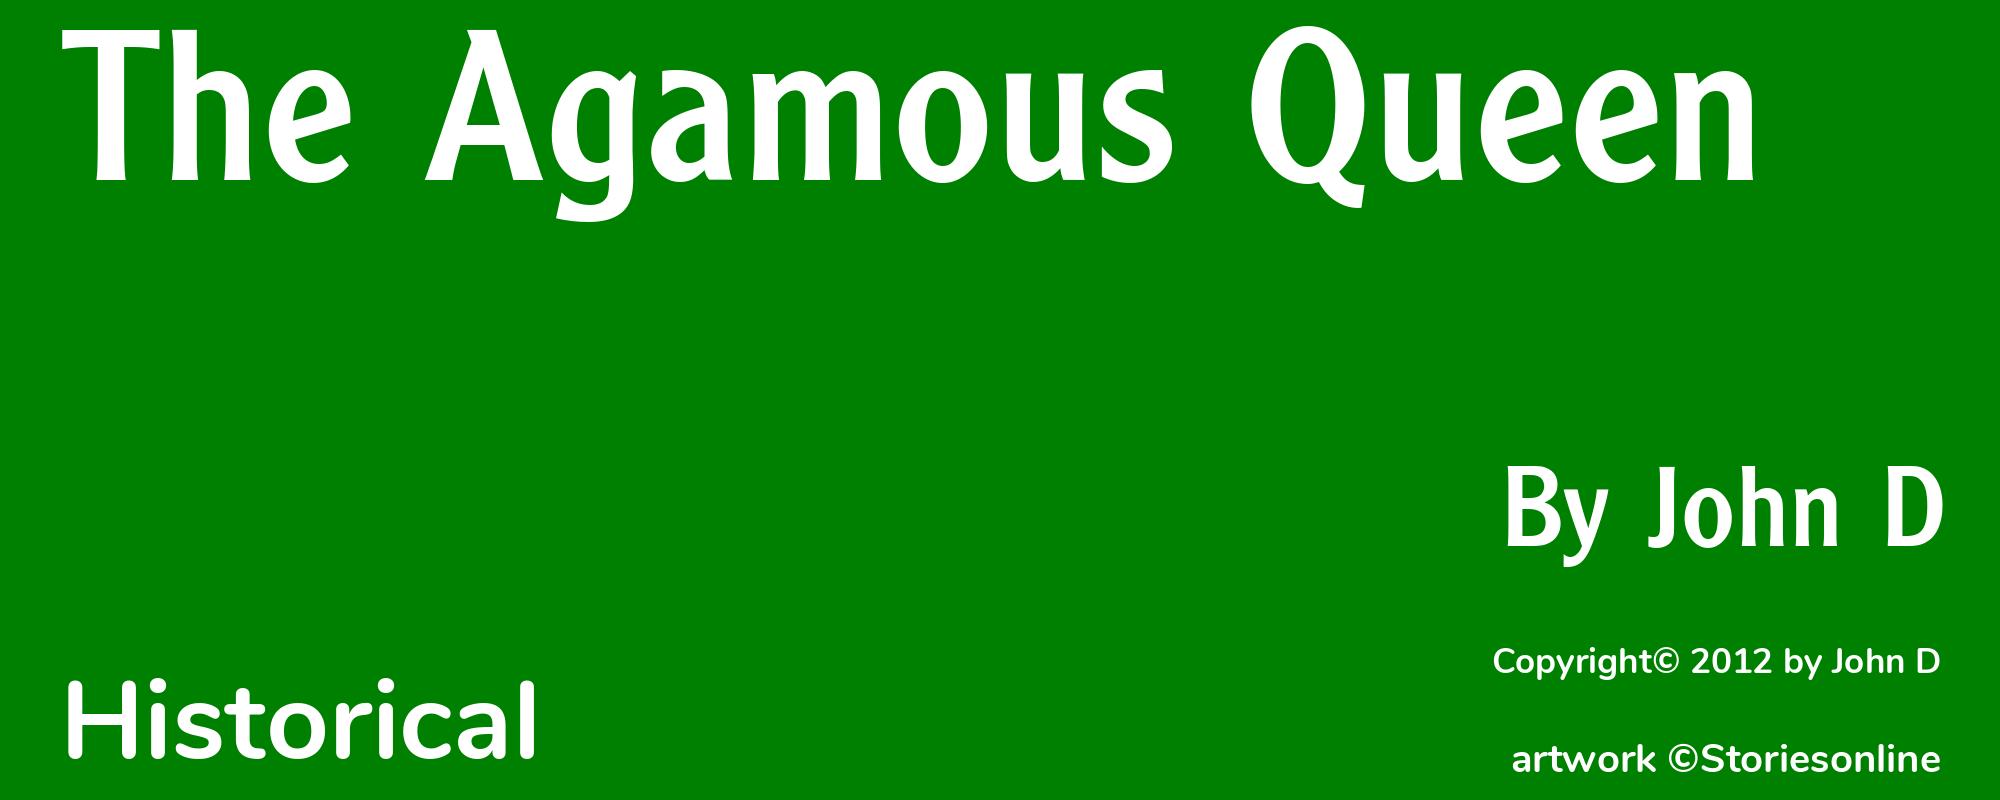 The Agamous Queen - Cover